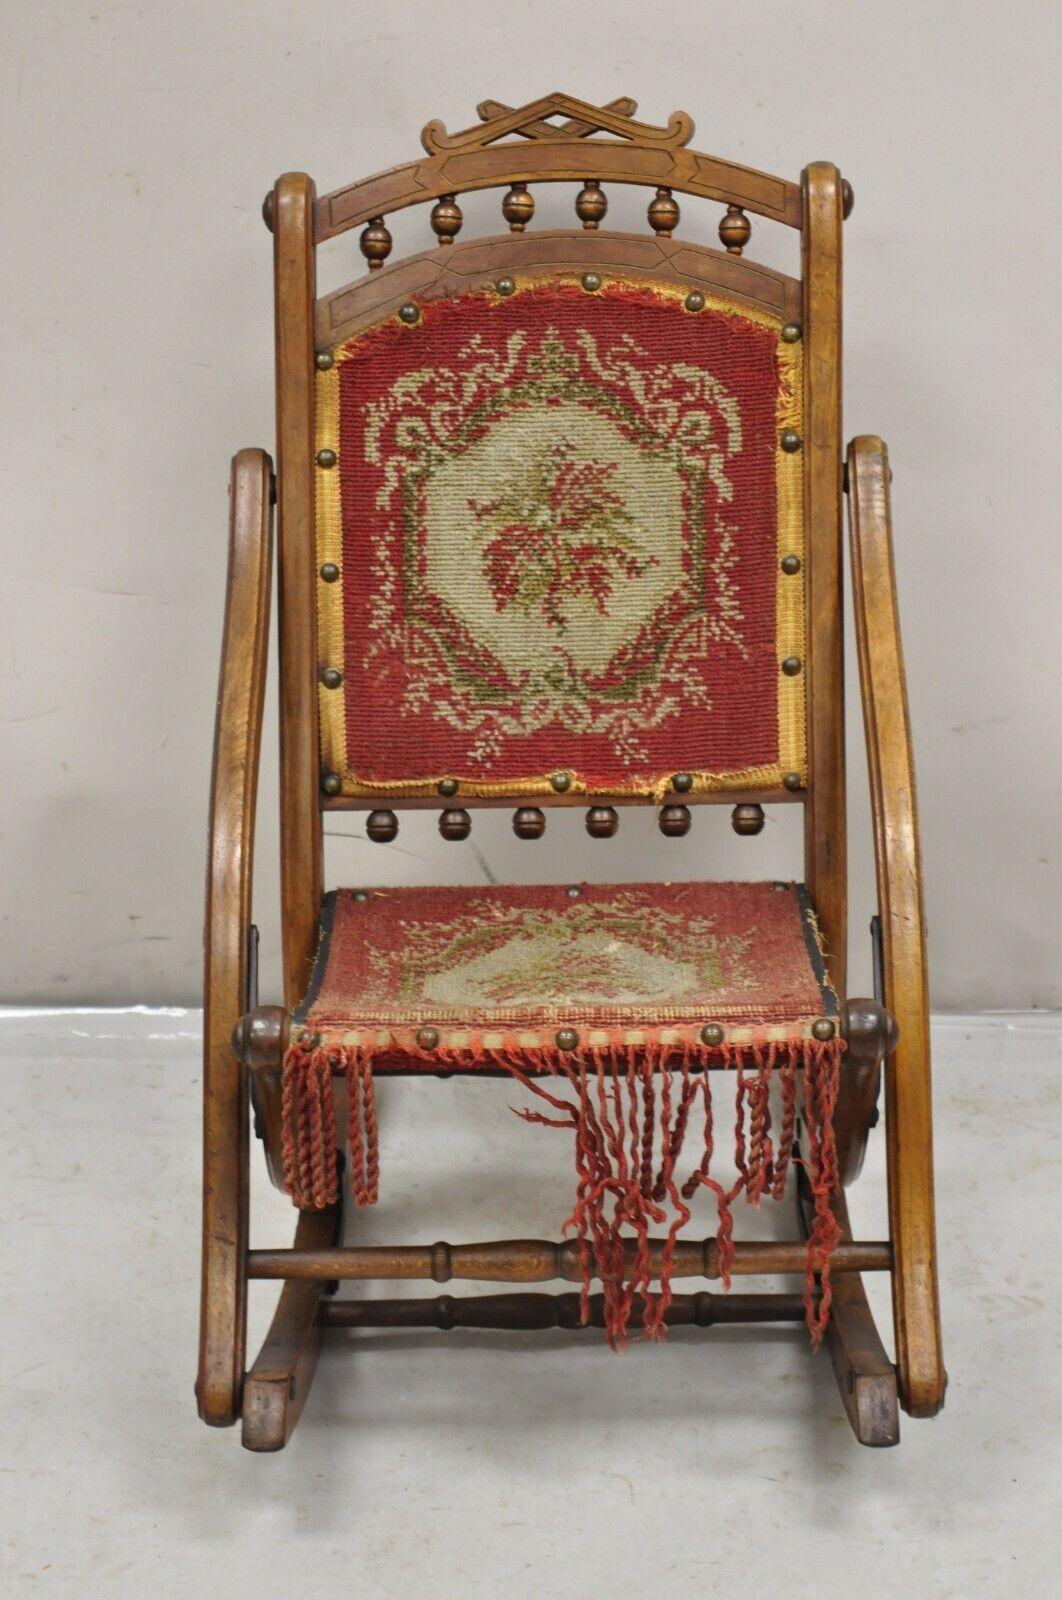 Antique Eastlake Victorian Walnut Small Child's Folding Rocker Rocking Chair. Item features a unique folding frame. Very nice child's chair. Circa 19th Century.
Measurements: 
Folded: 31